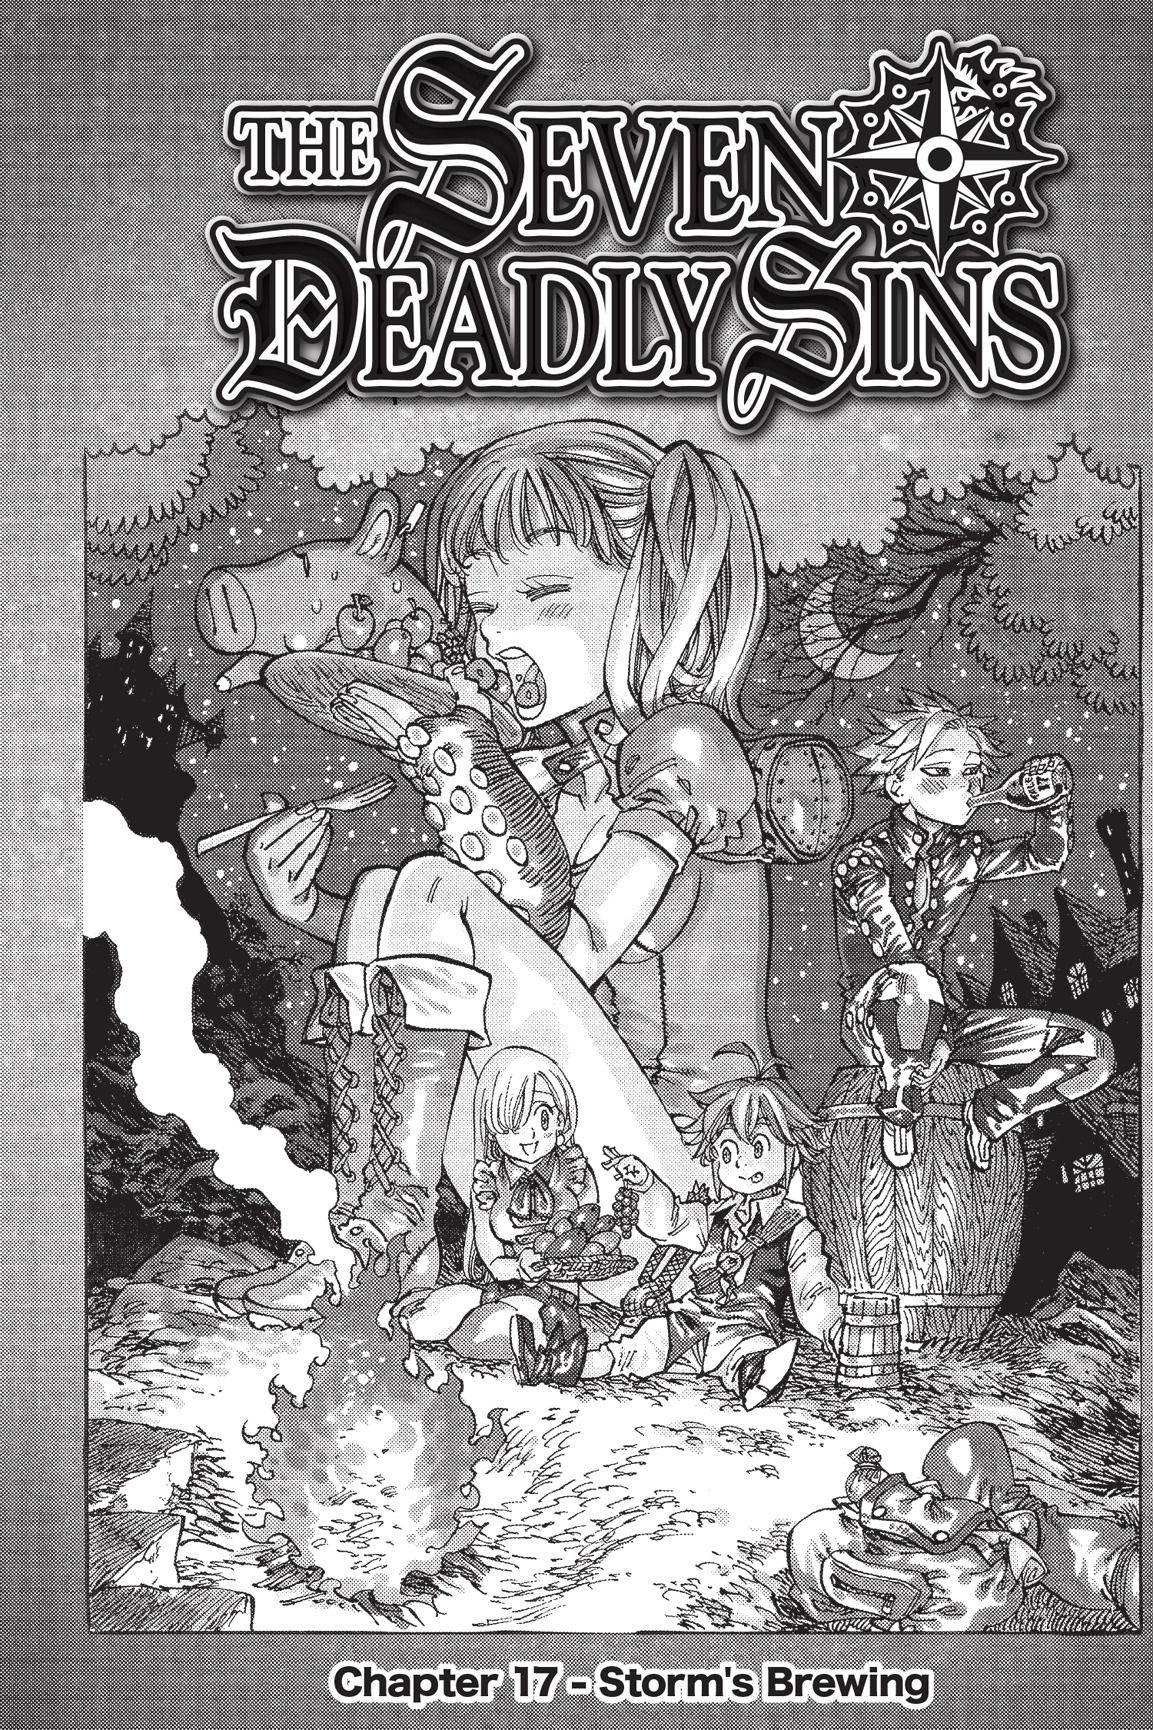 The Seven Deadly Sins (Covers & Chapter Title Cards) 40